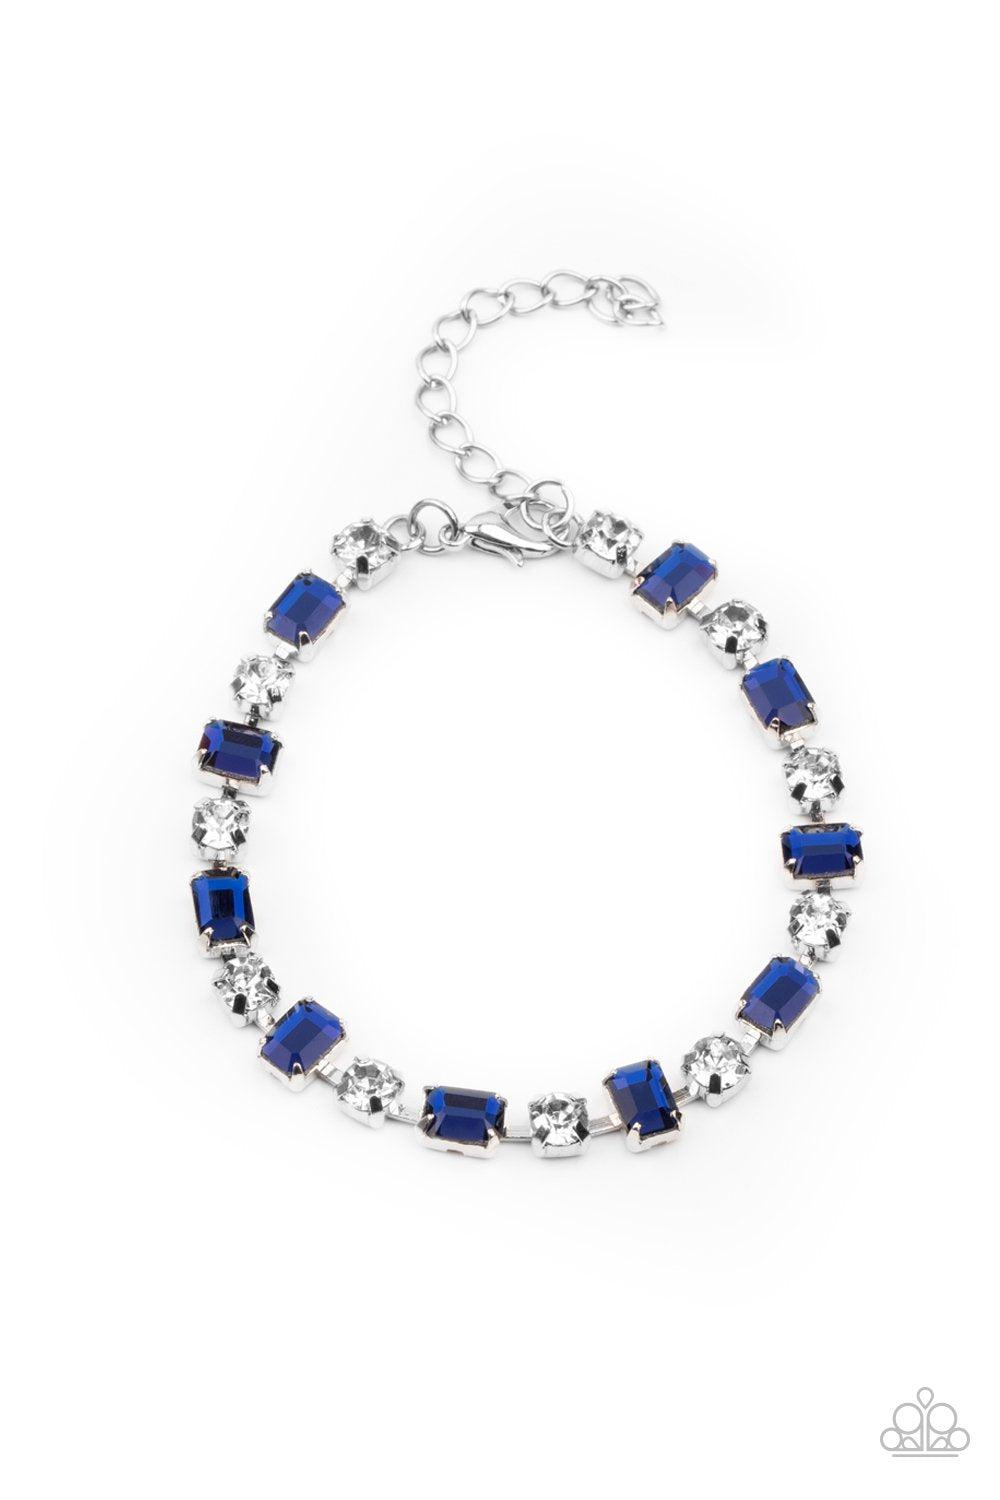 Out In Full FIERCE Blue and White Rhinestone Bracelet - Paparazzi Accessories- lightbox - CarasShop.com - $5 Jewelry by Cara Jewels